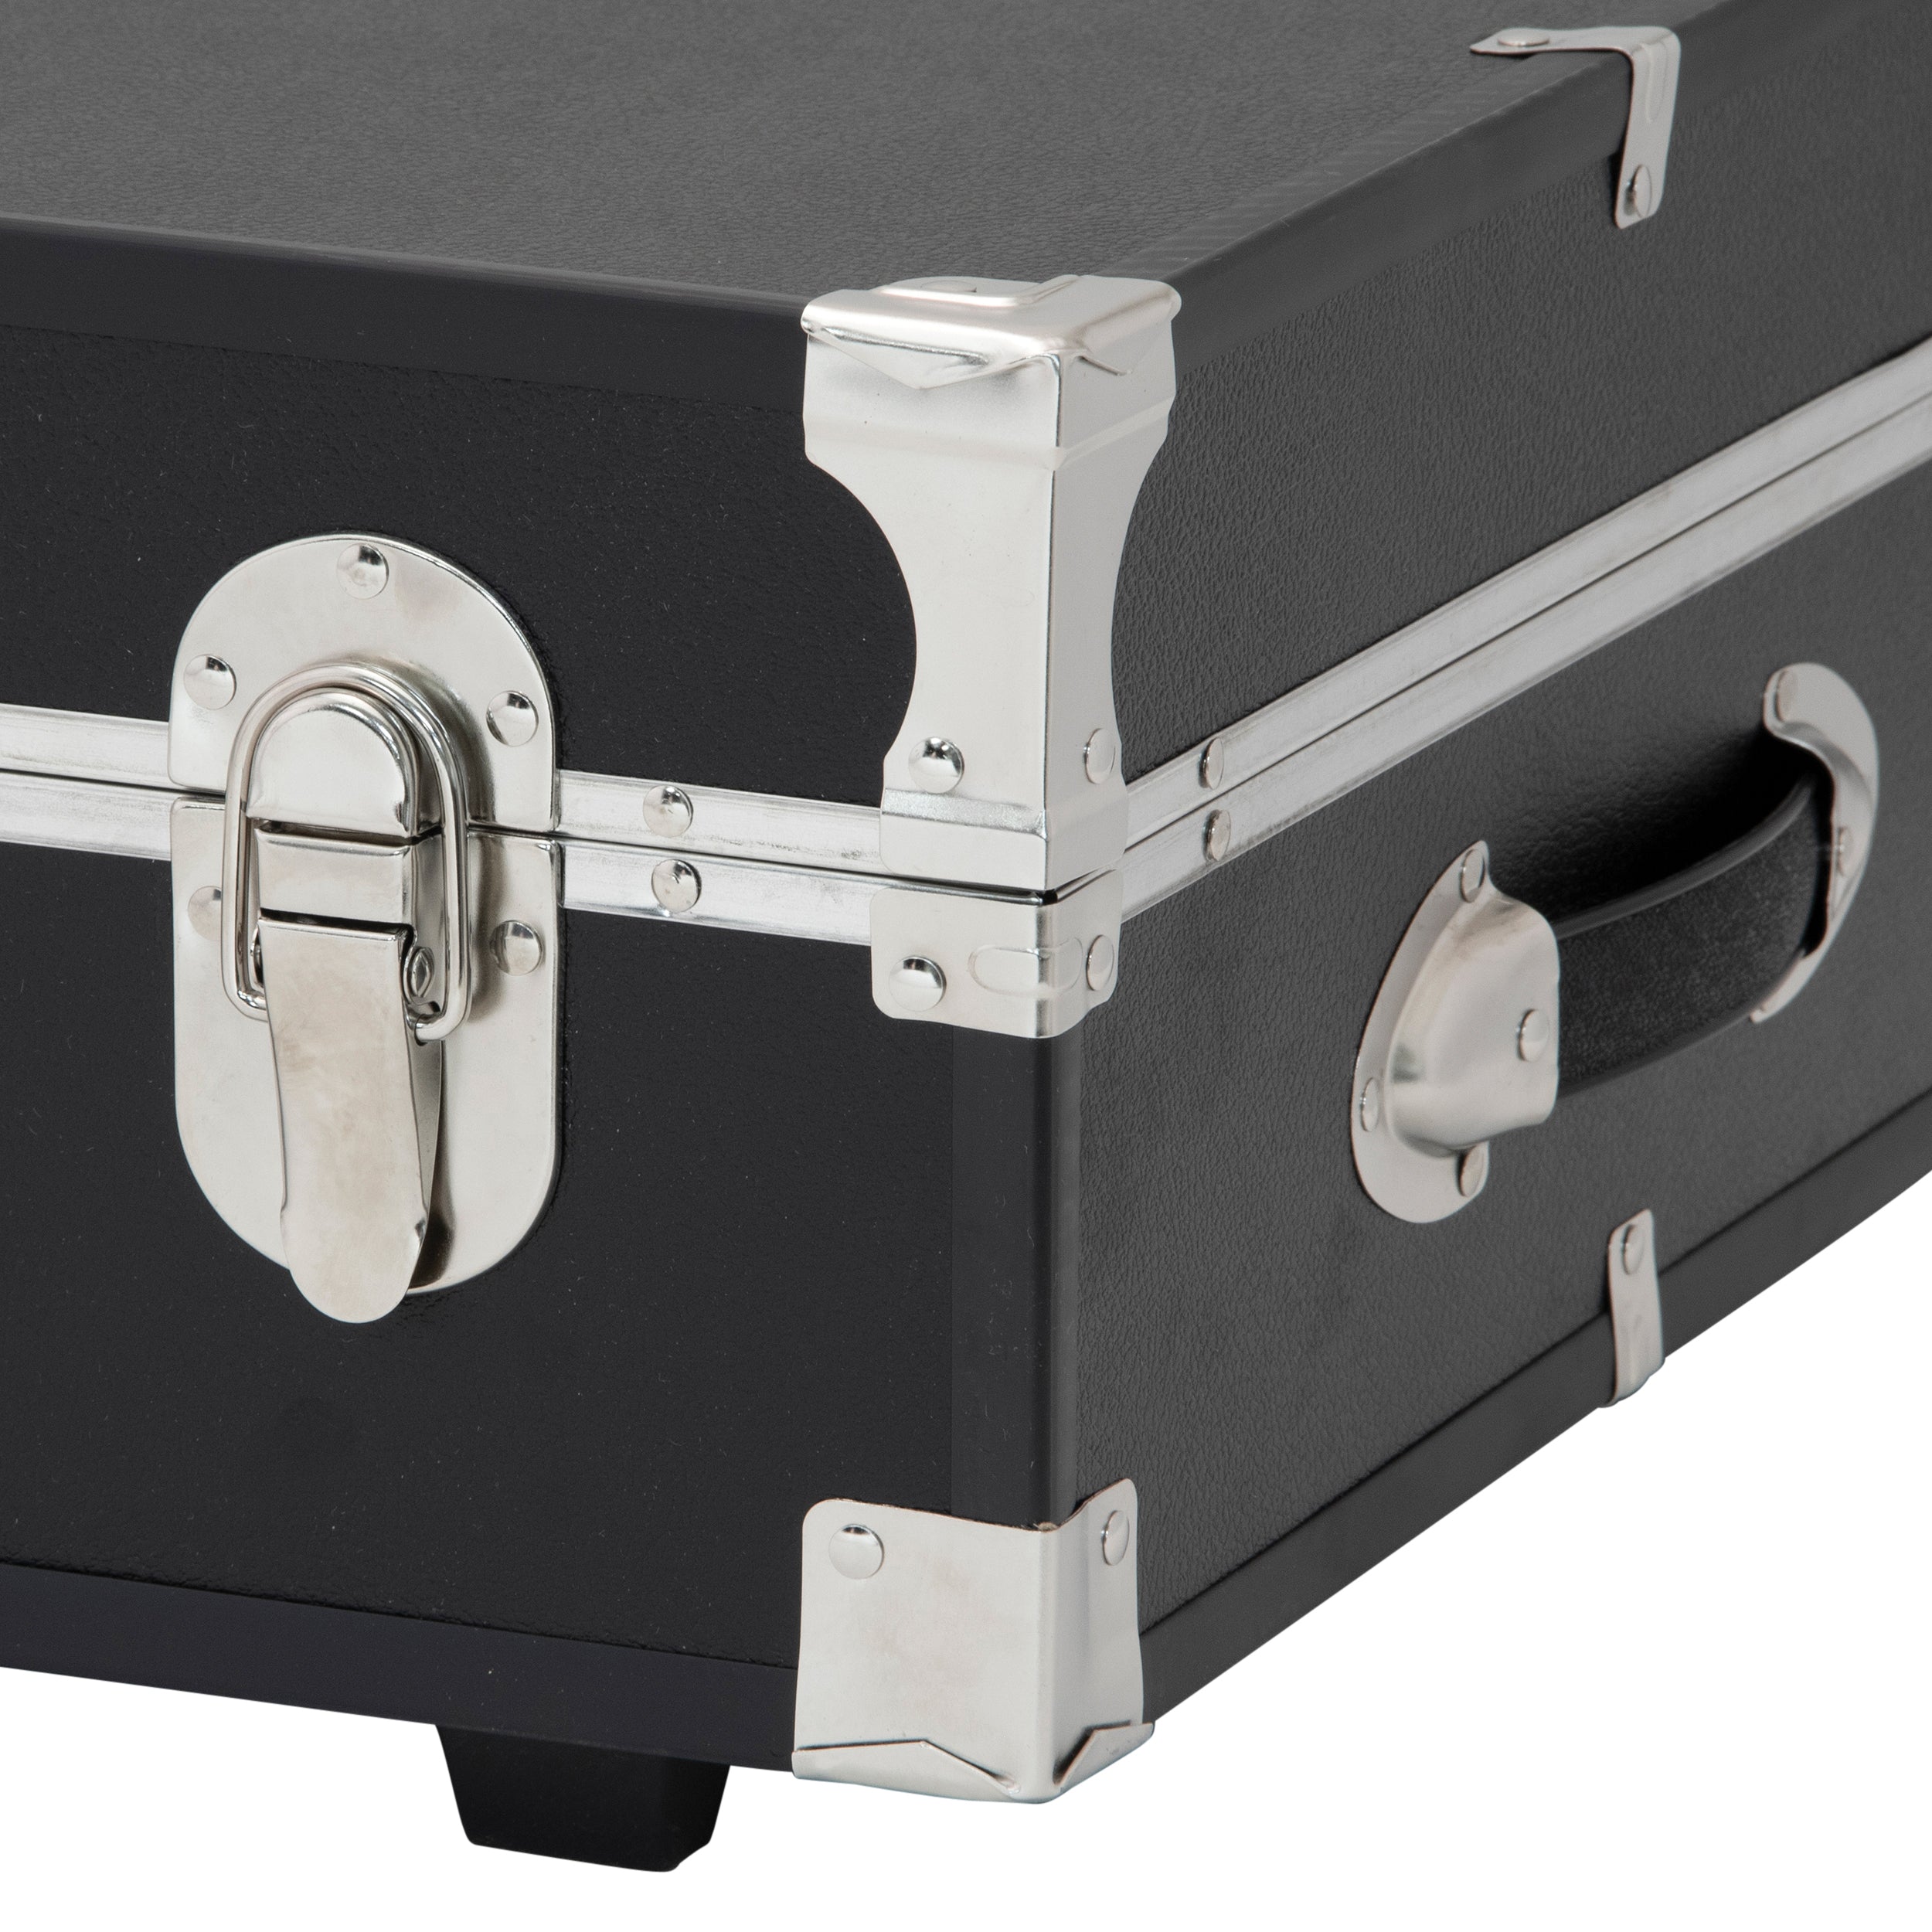 Metal fastner, siding, and carry handle  - Seward Under the Bed 31" Trunk with Wheels & Lock, Black